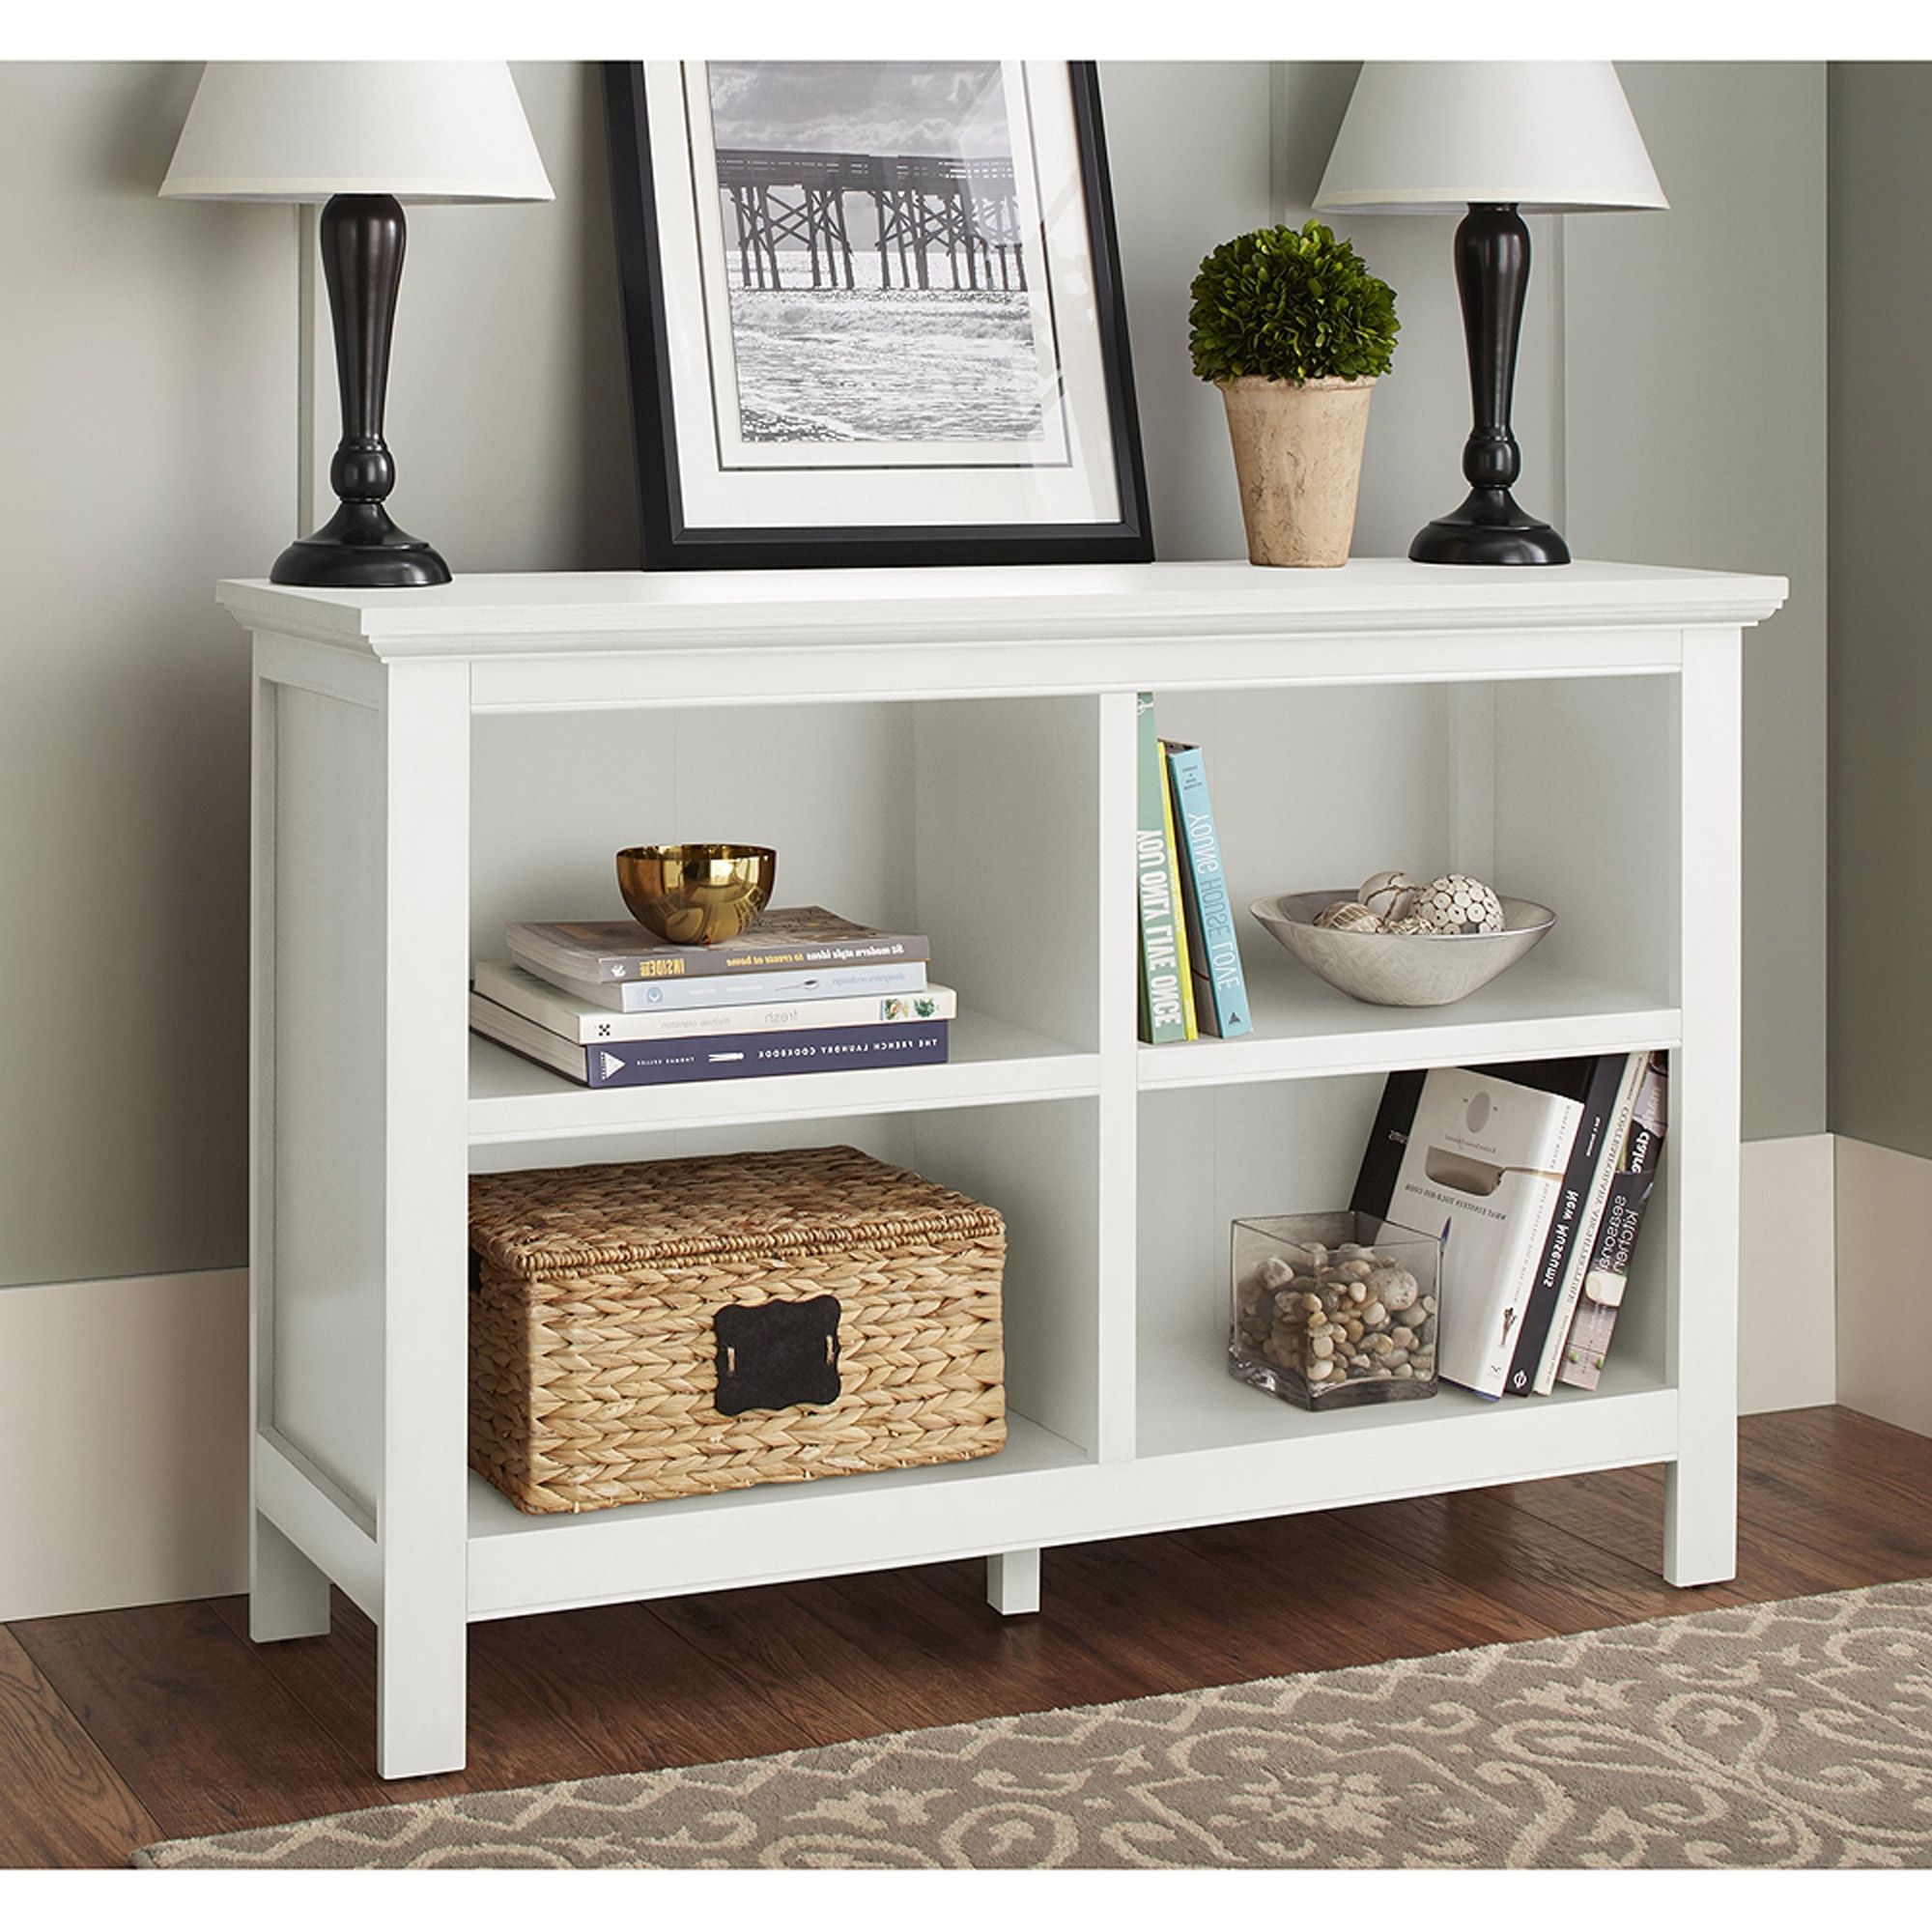 Walmart White Bookcases Within Well Liked Product (View 2 of 15)